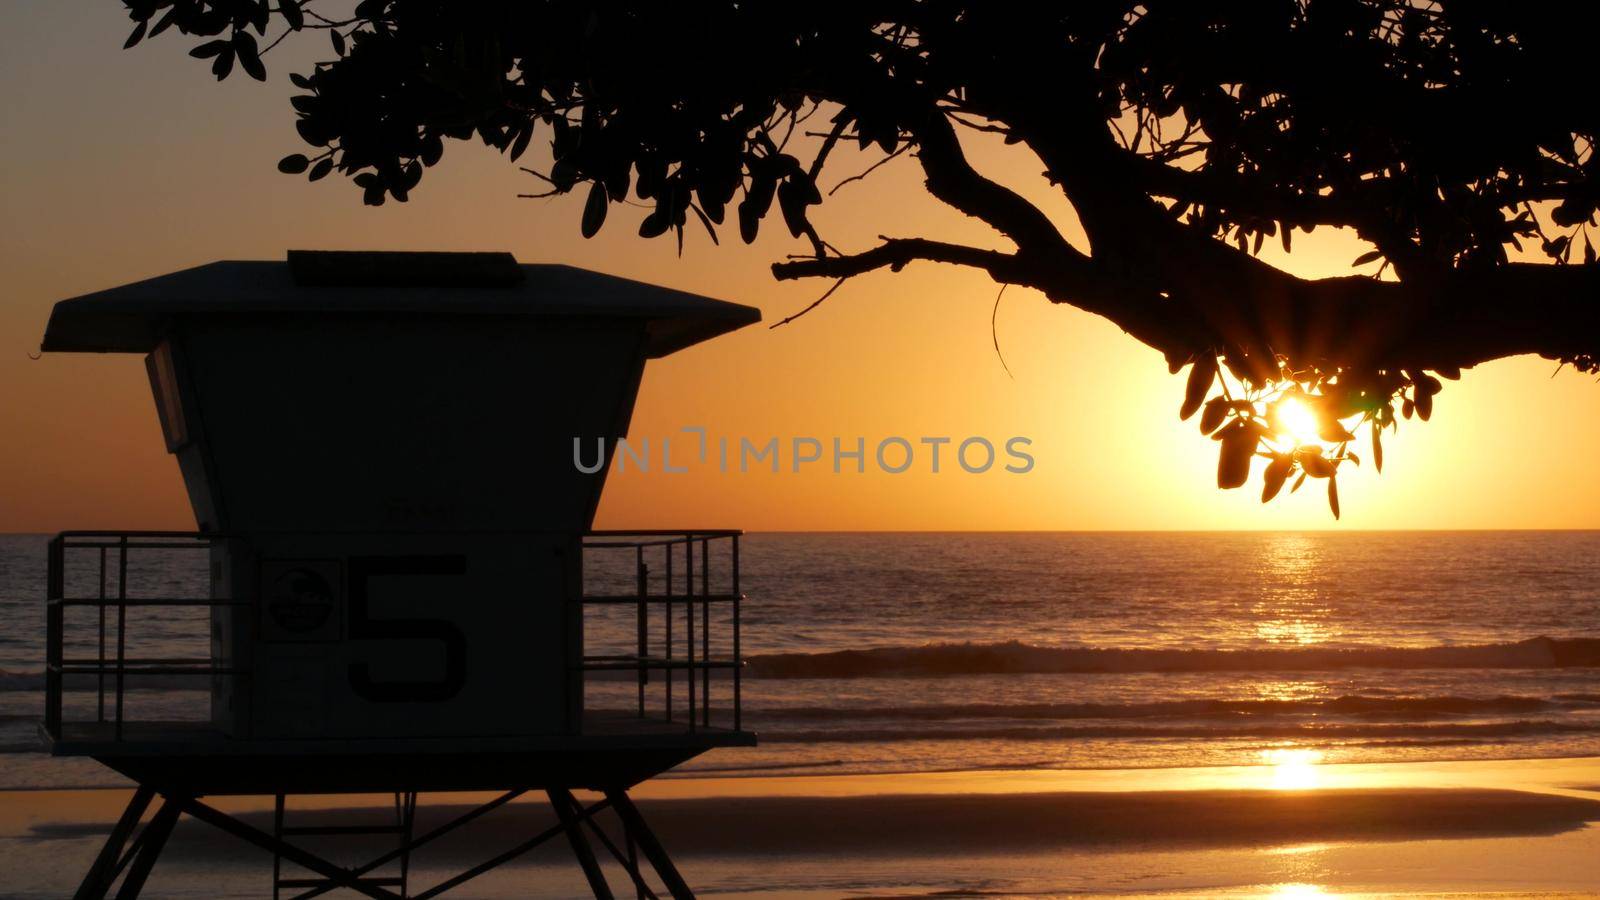 Lifeguard watch tower, sunny sunset beach, Oceanside USA. Rescue station, waterfront watchtower hut and tree leaves, pacific ocean coast atmosphere. California summertime aesthetic, Los Angeles vibes.